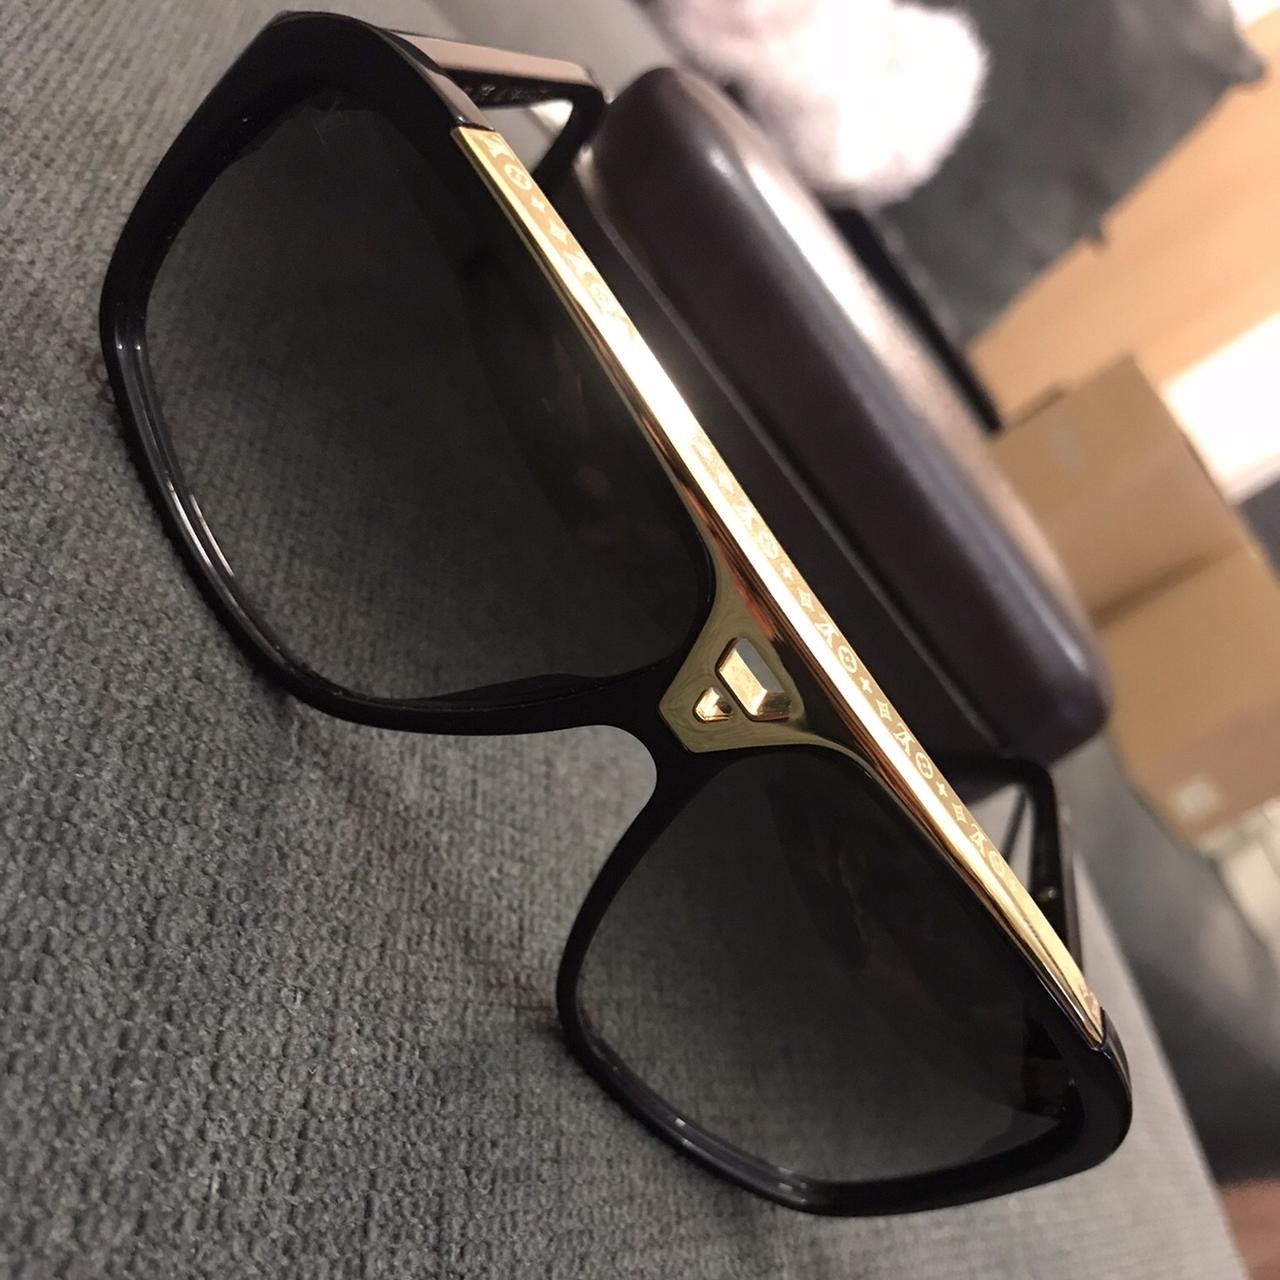 Louis Vuitton Sunglasses with hard clamshell case - Depop